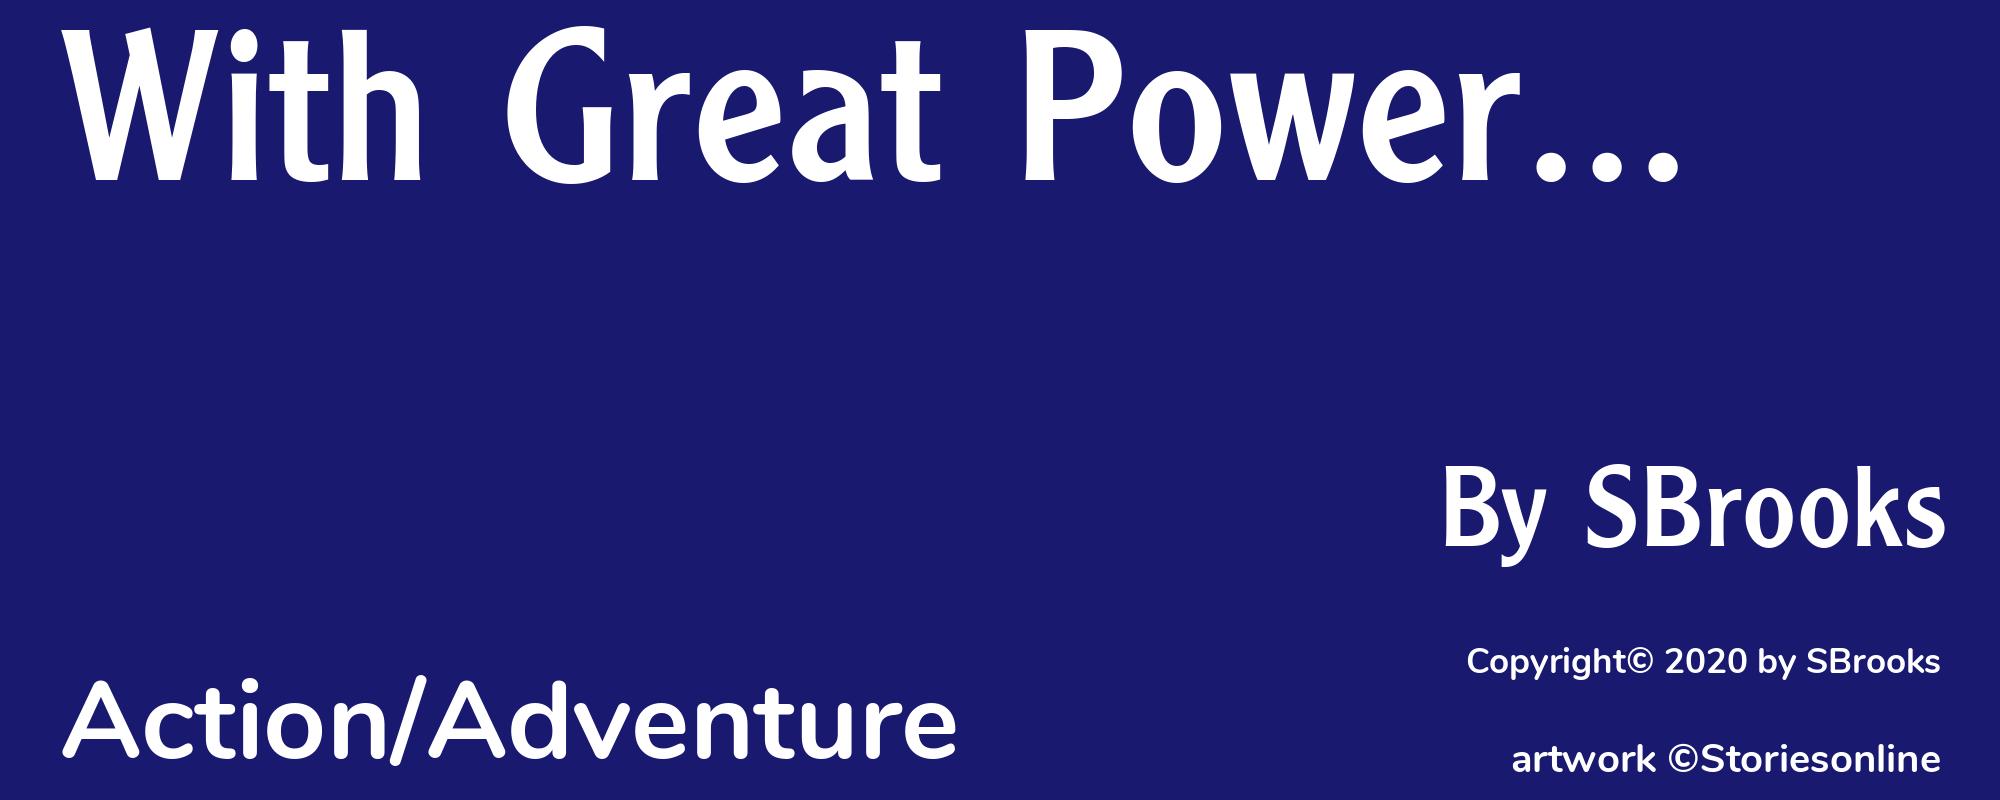 With Great Power... - Cover